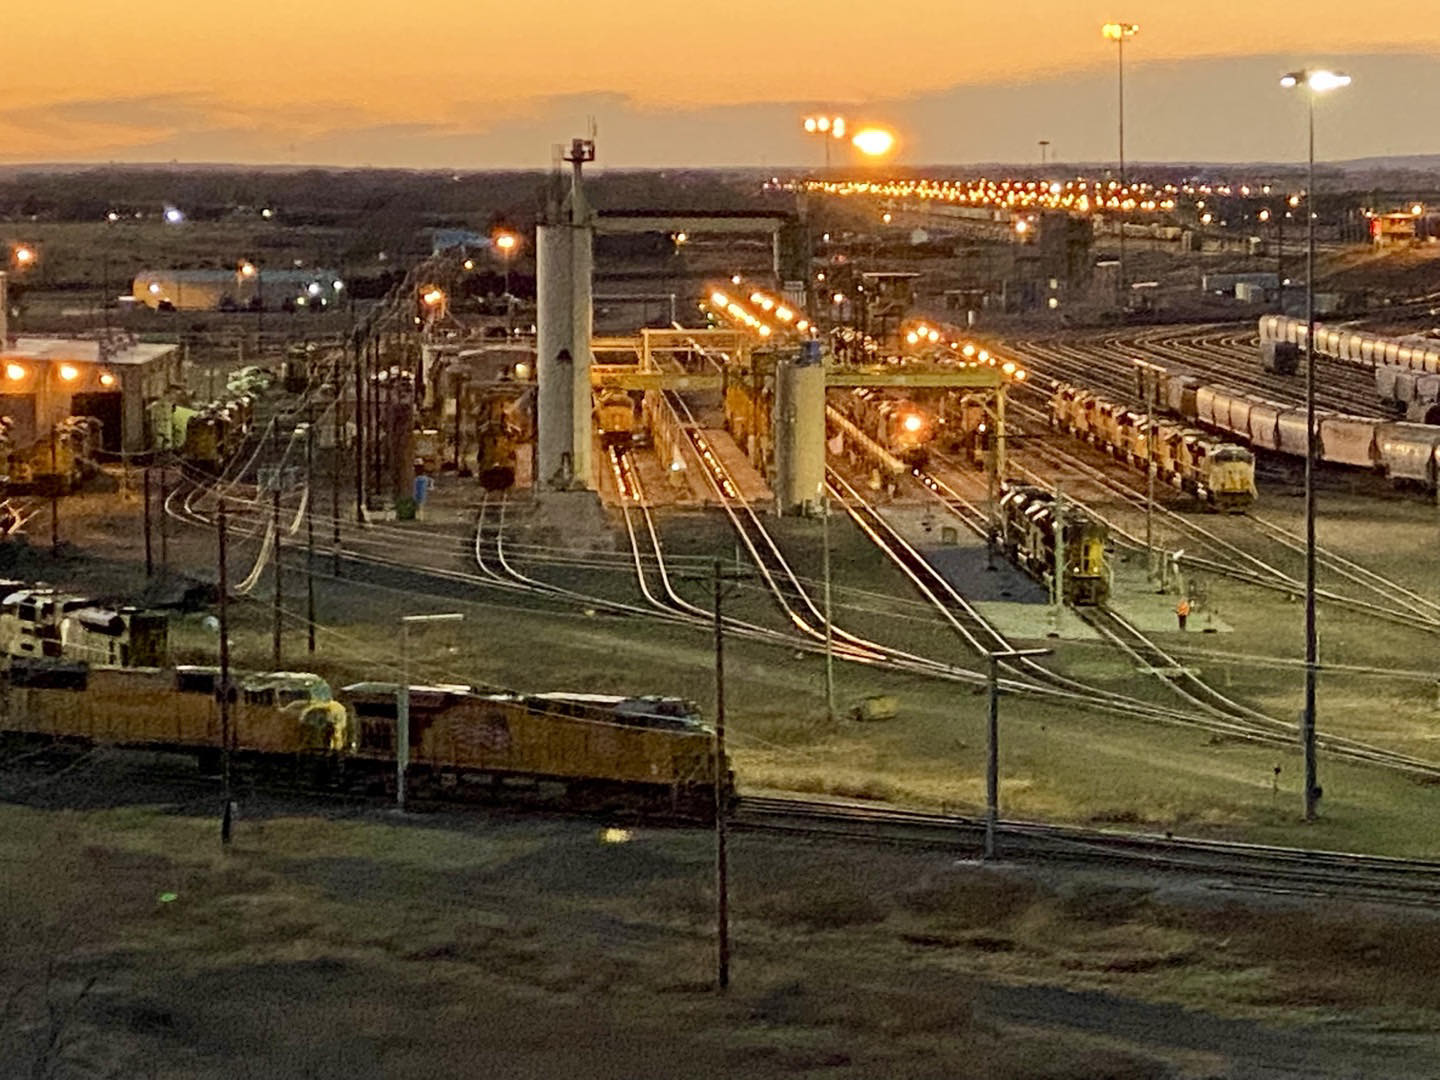 Our overnight stop this evening is in North Platte, Nebraska at The Golden Spike Tower and Visitor Center. The tower overlooks the world’s largest rail yard (The Union Pacific Bailey Yard) which handles 10,000 rail cars a day, encompassing almost 3,000 acres and stretching for 8 miles. On an average day 300 diesel locomotives are serviced here.#northplattenebraska #unionpacificbaileyyard #gildenspiketowerandvisitorscenter #orcuttphotography #railroadphotography